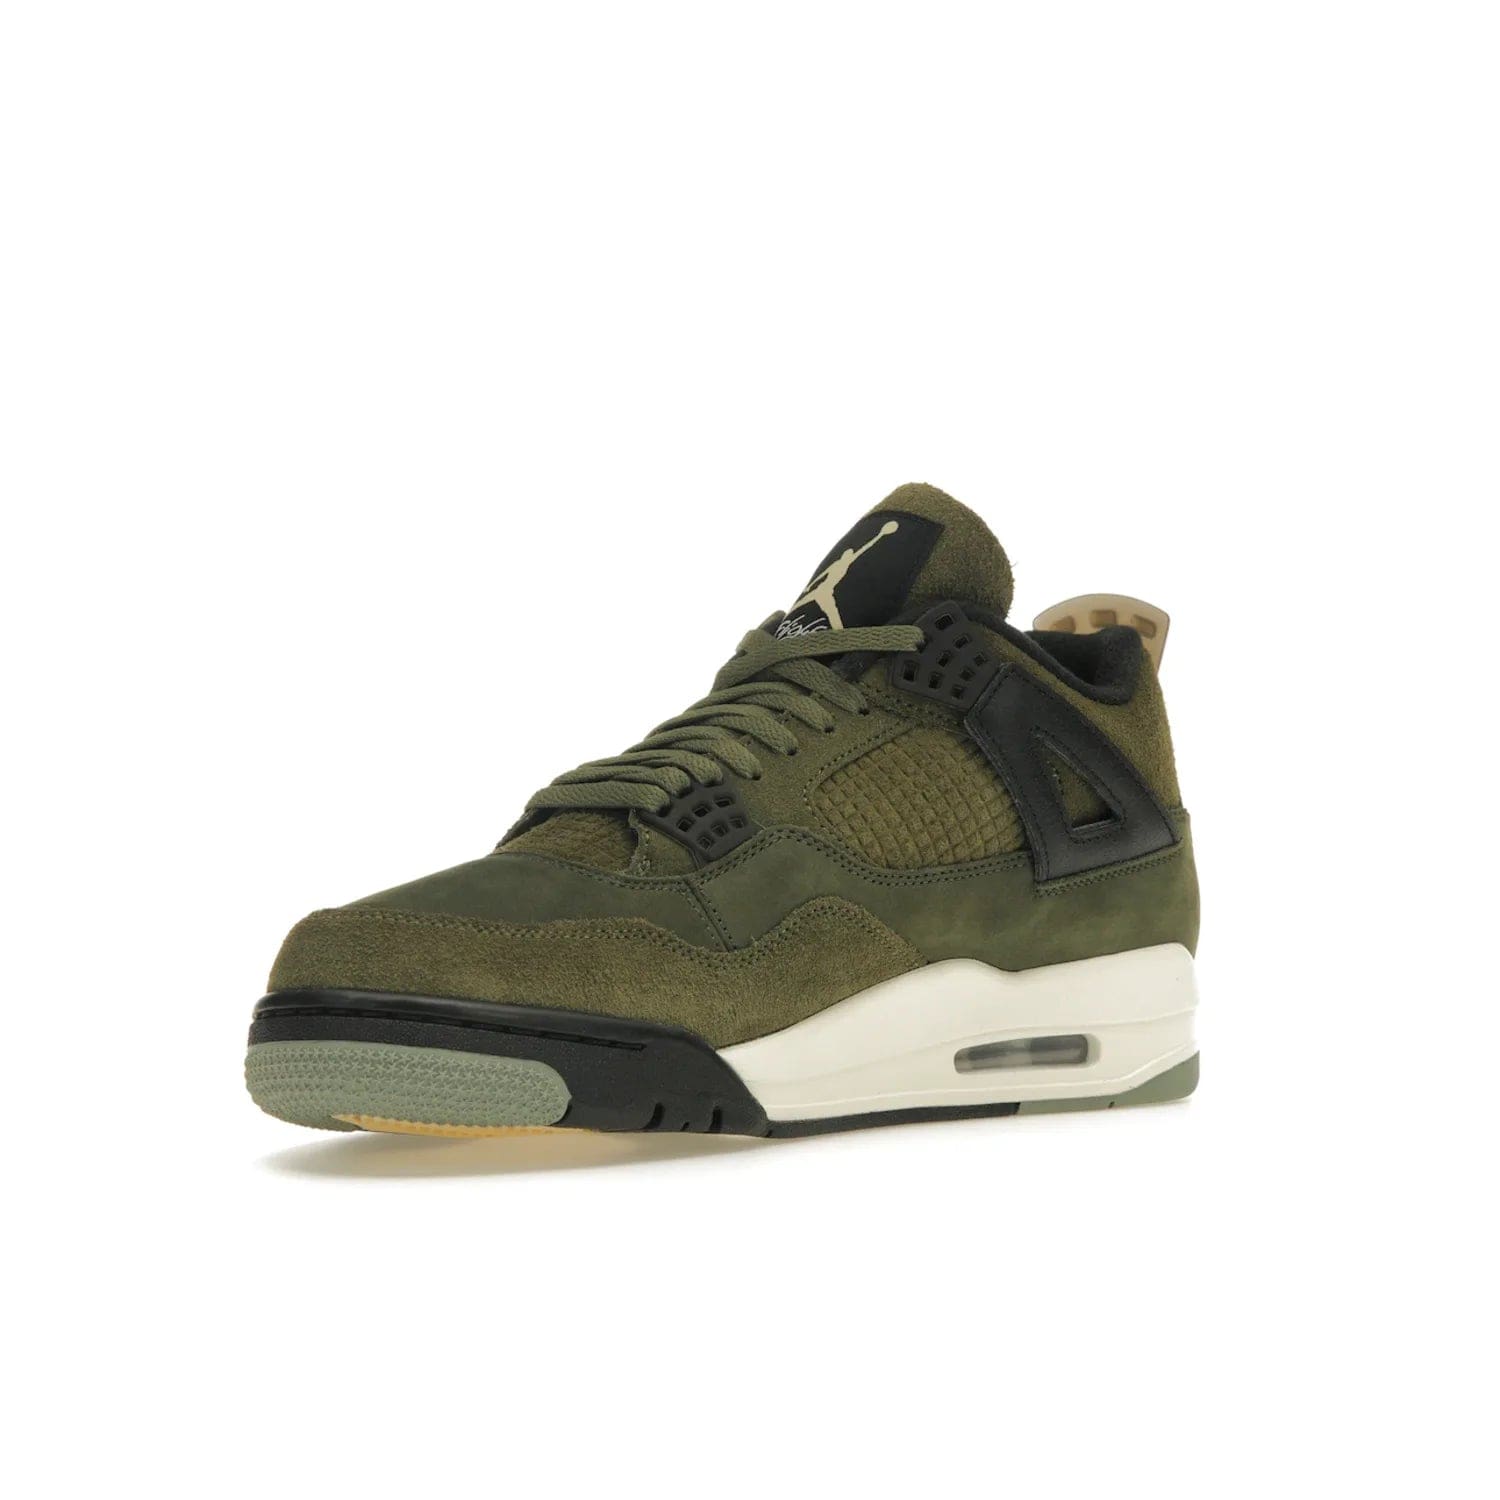 Jordan 4 Retro SE Craft Medium Olive - Image 15 - Only at www.BallersClubKickz.com - Grab the Jordan 4 Retro SE Crafts for a unique style. Combines Medium Olive, Pale Vanilla, Khaki, Black and Sail, with same classic shape, cushioning, and rubber outsole. Available on November 18th!